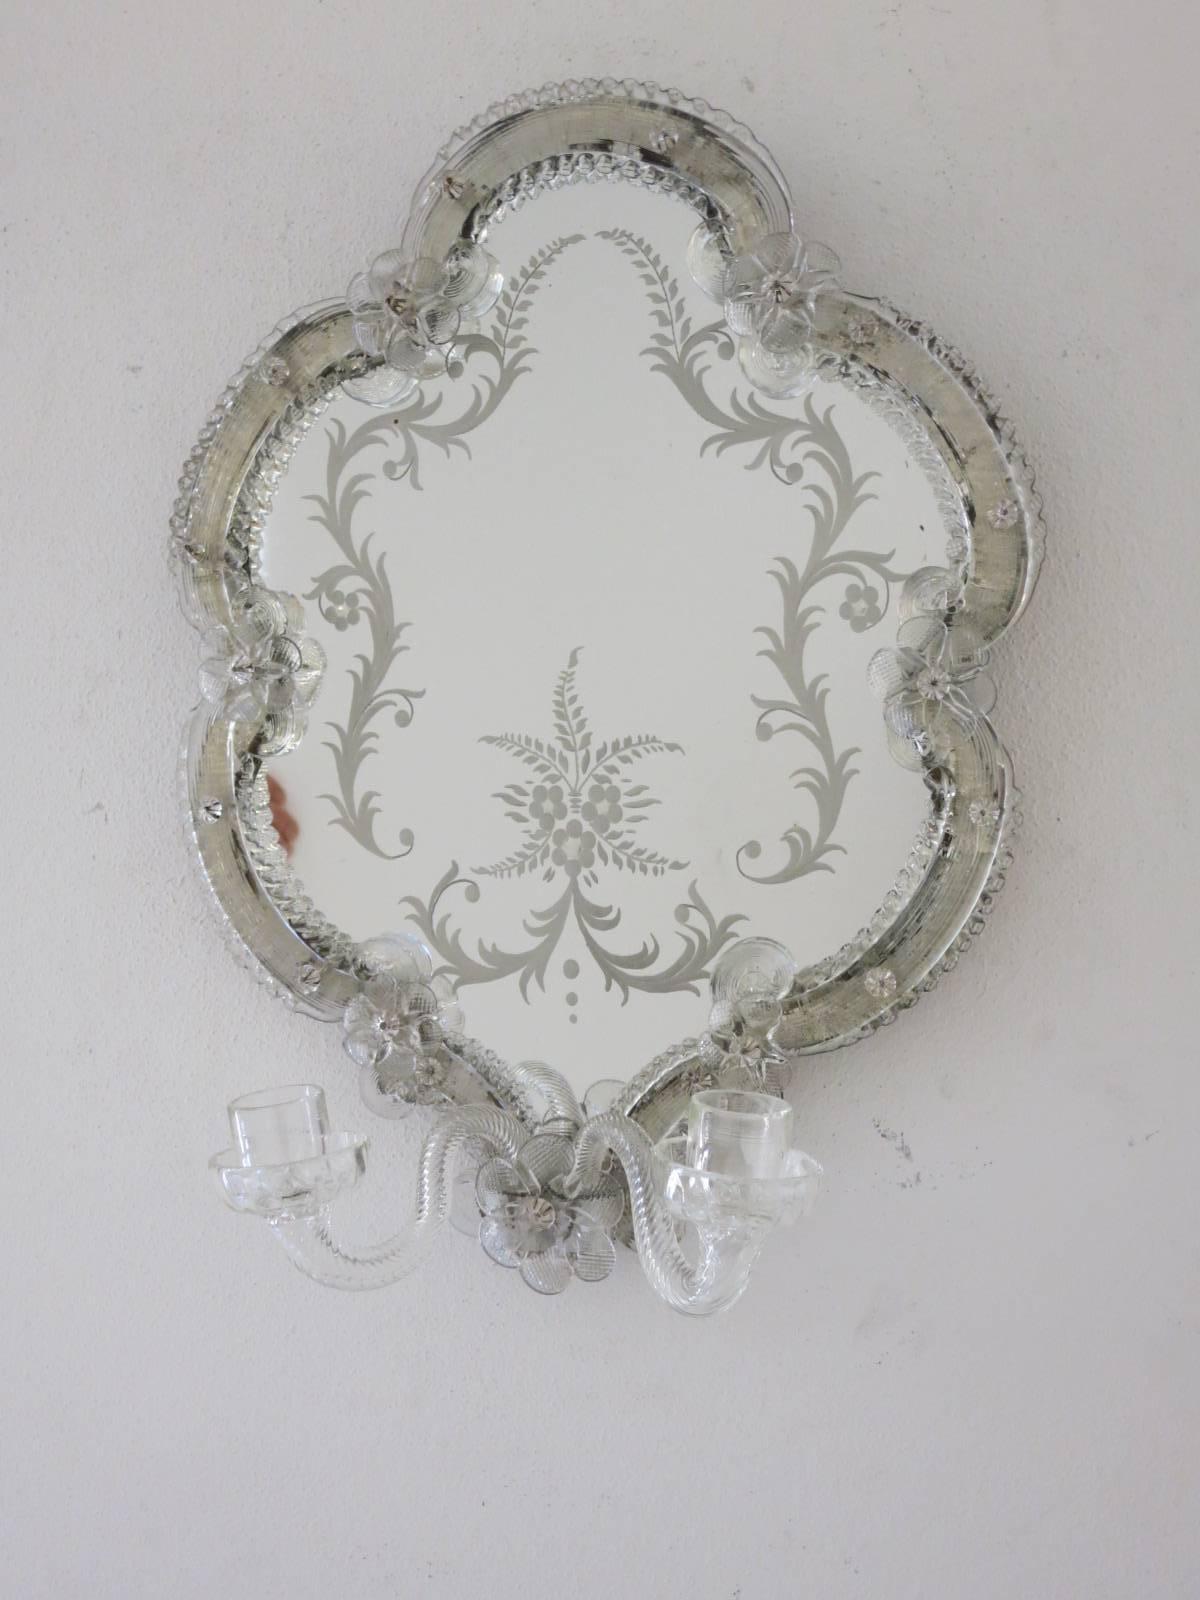 Vintage Italian Rococo Revival mirror wall sconces hand blown in clear Murano glass with decorative details, antiqued patina on mirror, mounted on wood back frame / Made in Venice Italy in the 1900s
2 candles each sconce
Height: 16 inches / Width: